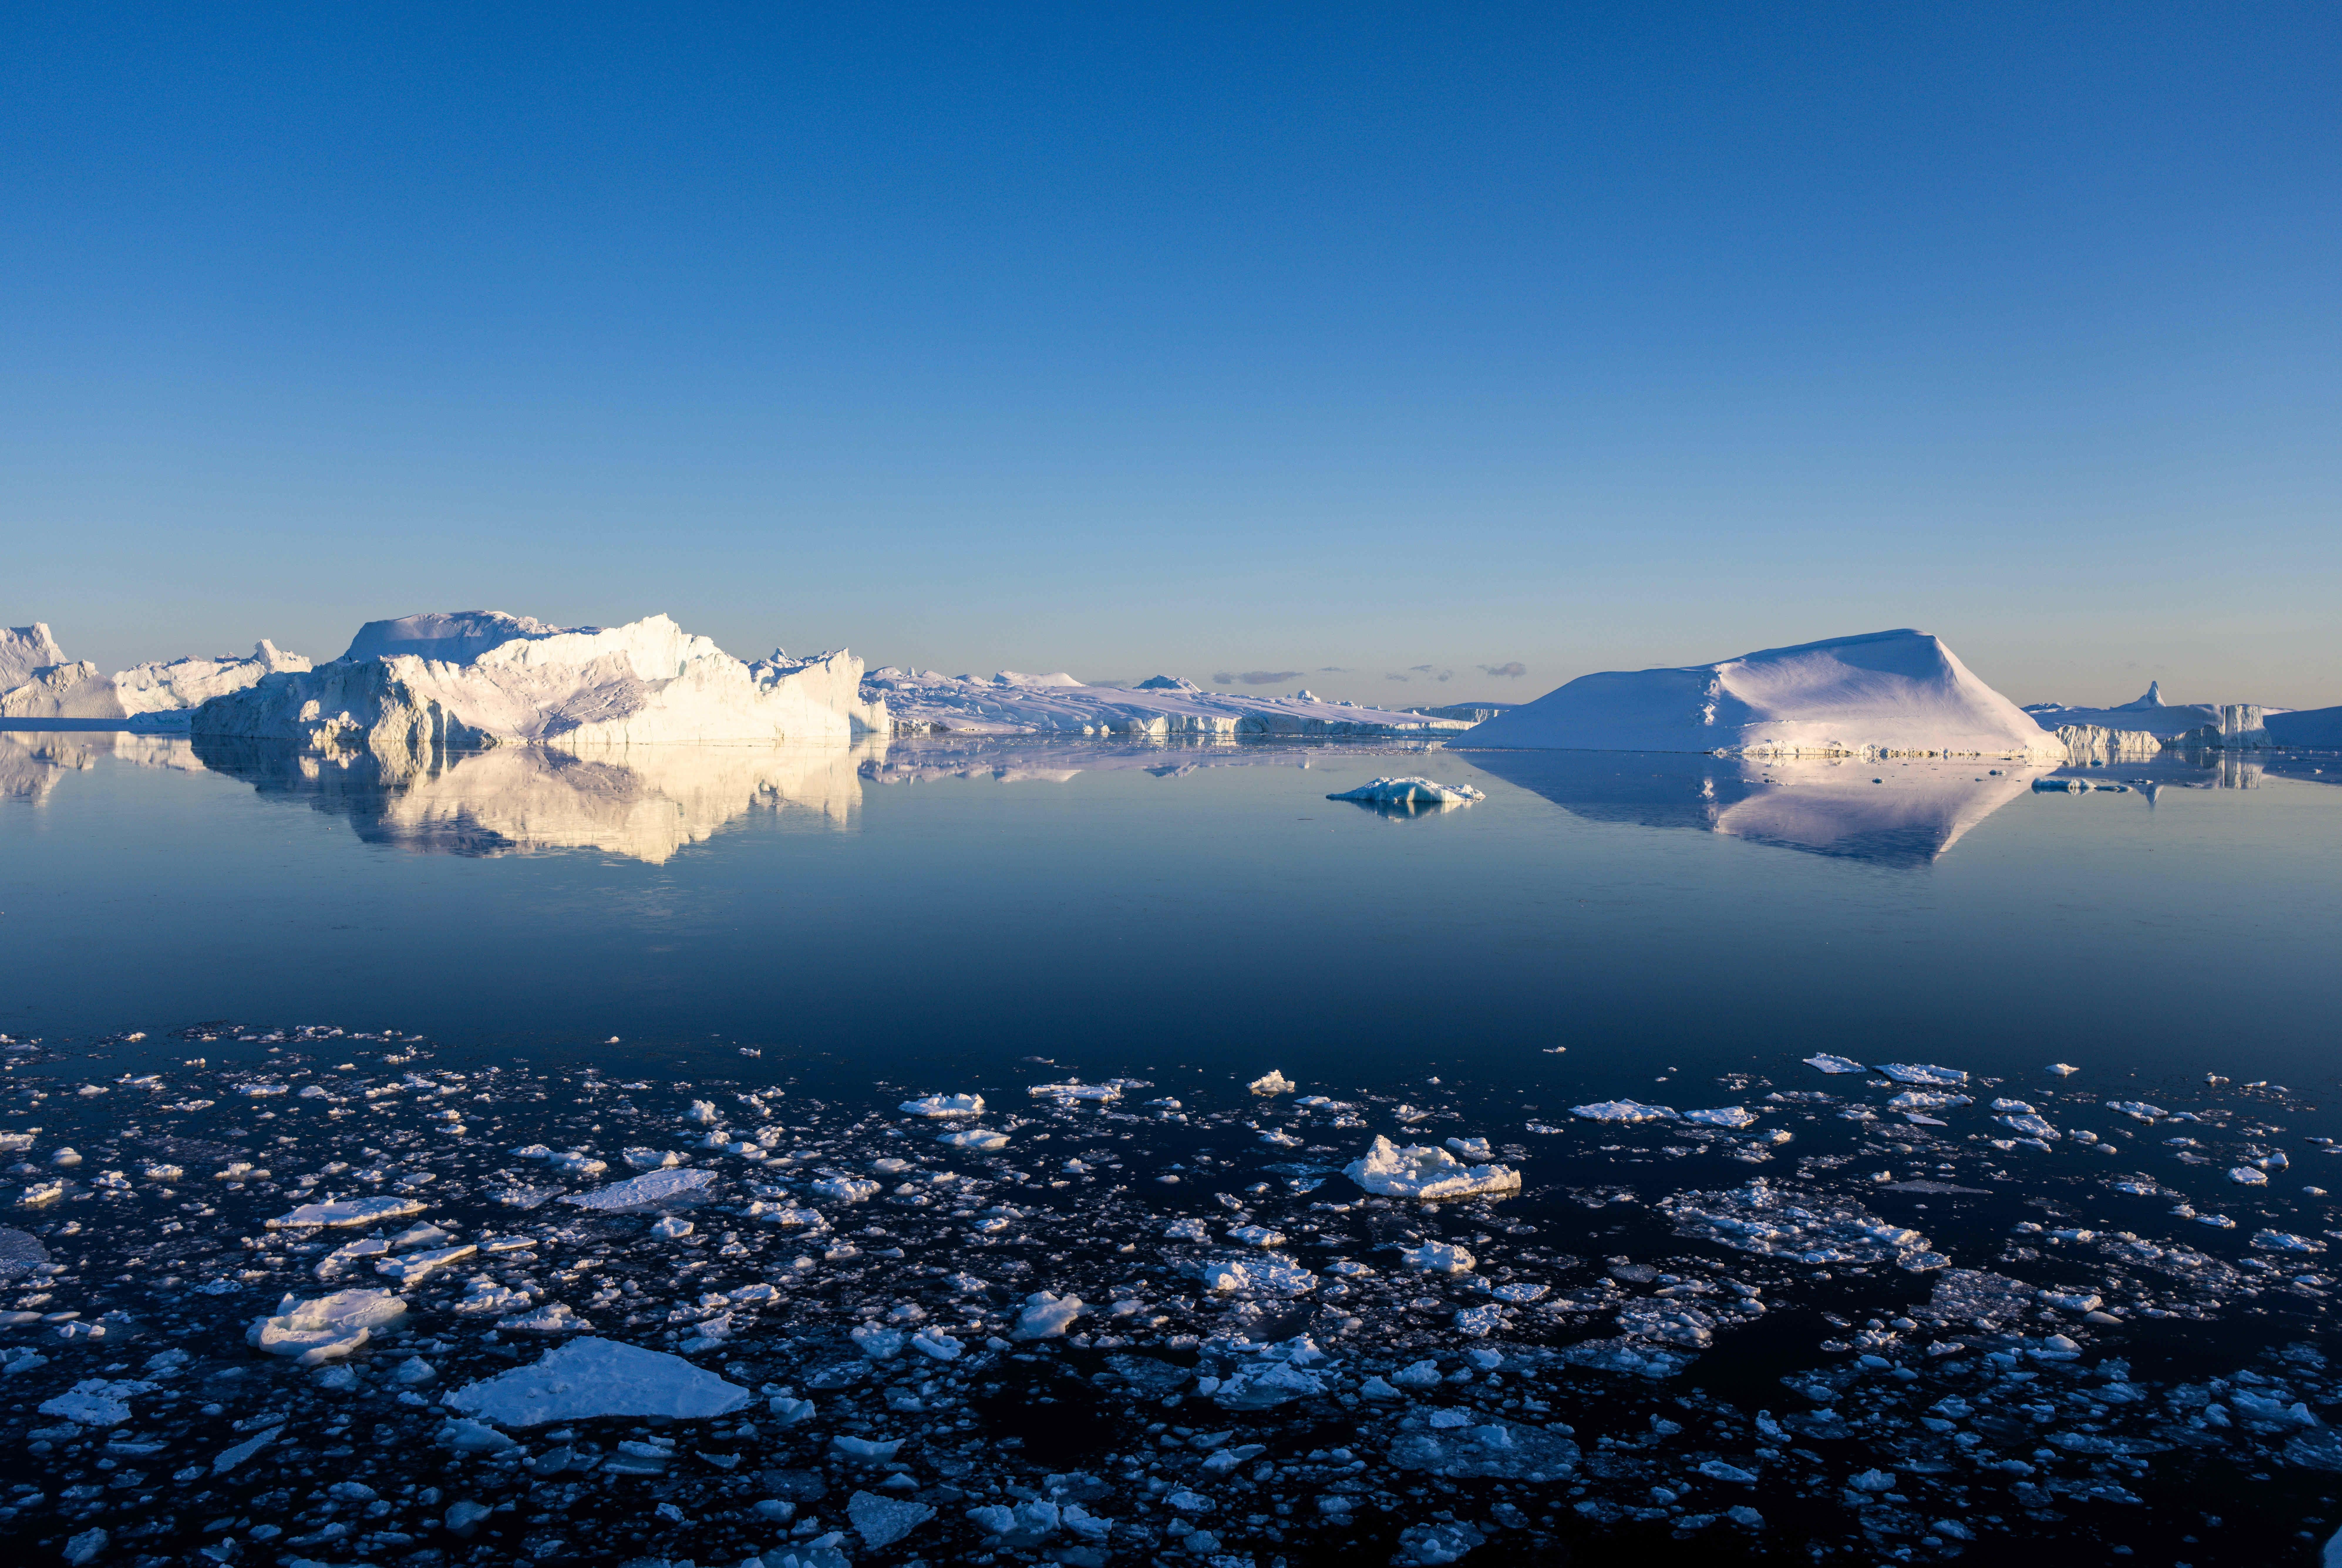 Water From Main Greenland Ice Soften Might Fill 7.2 Million Olympic Swimming Swimming pools